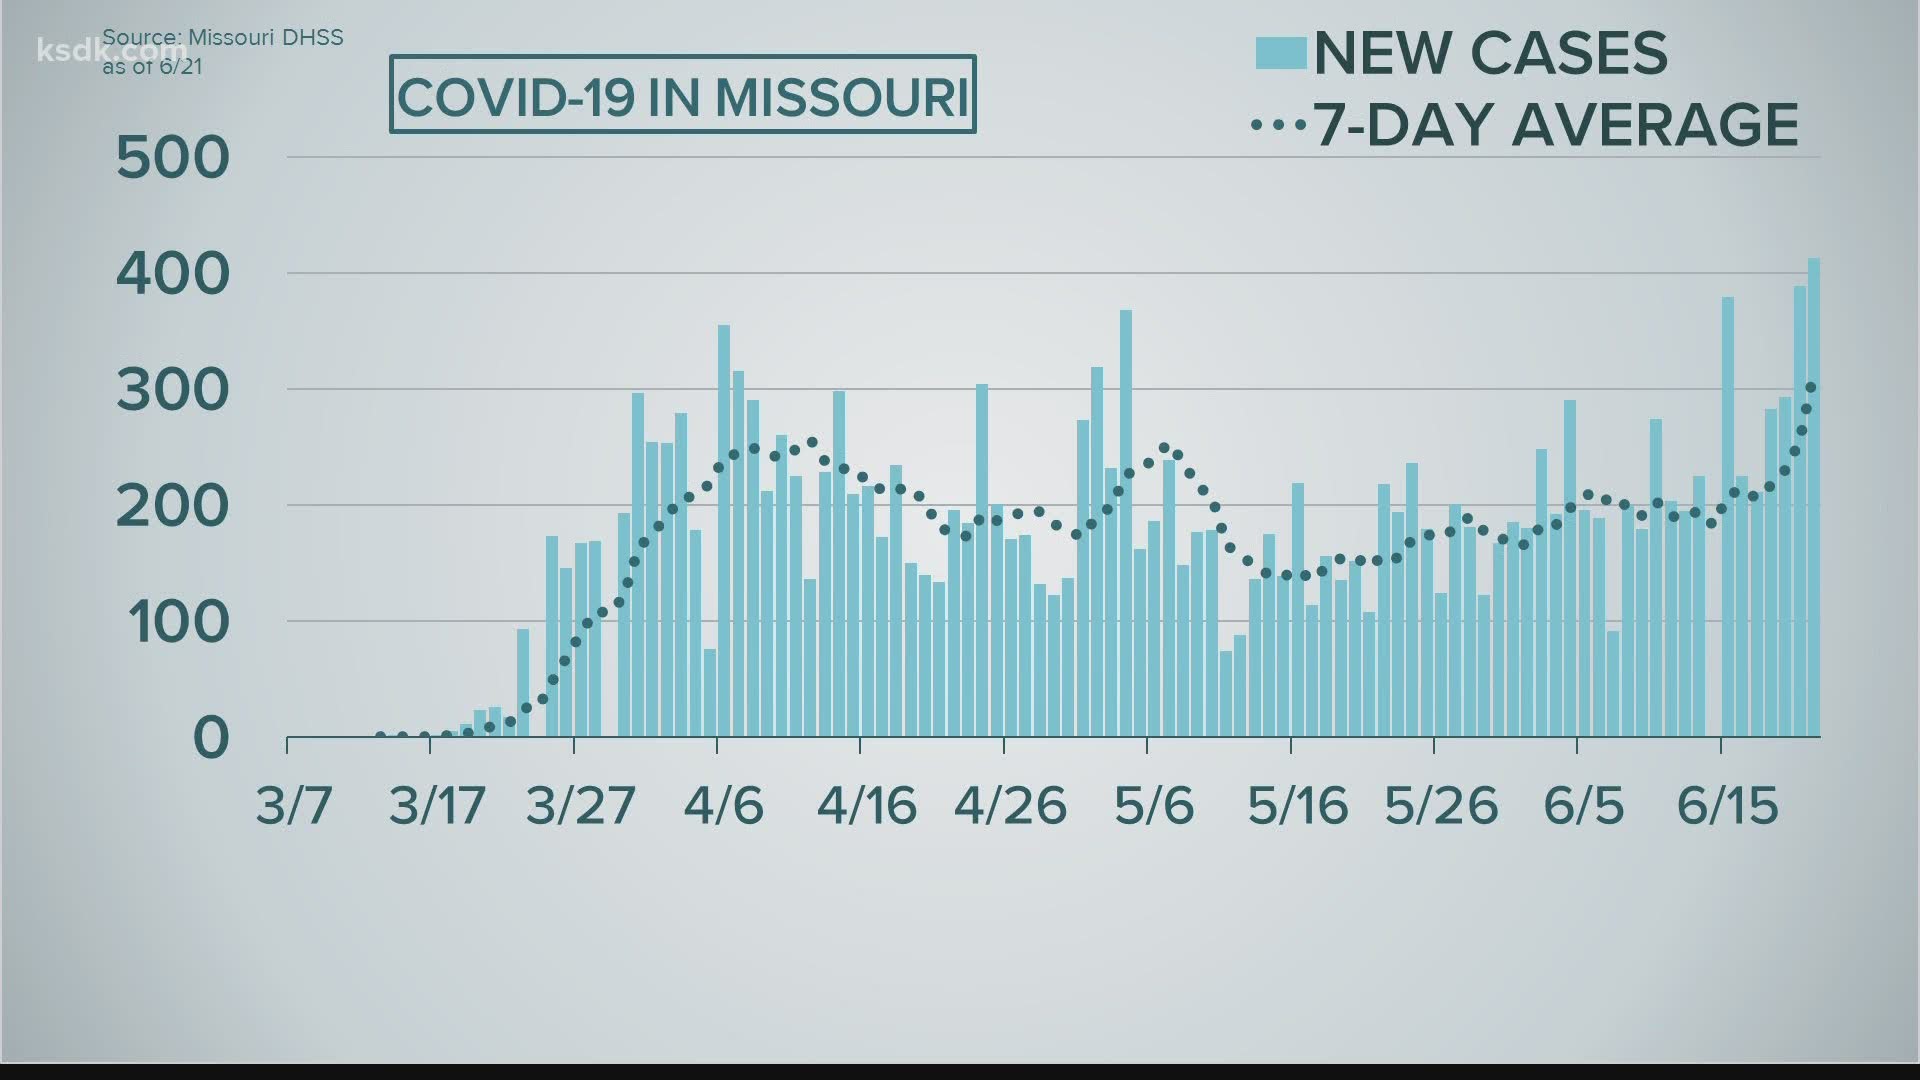 Sunday was the first time the state reported more than 400 new cases in a single day